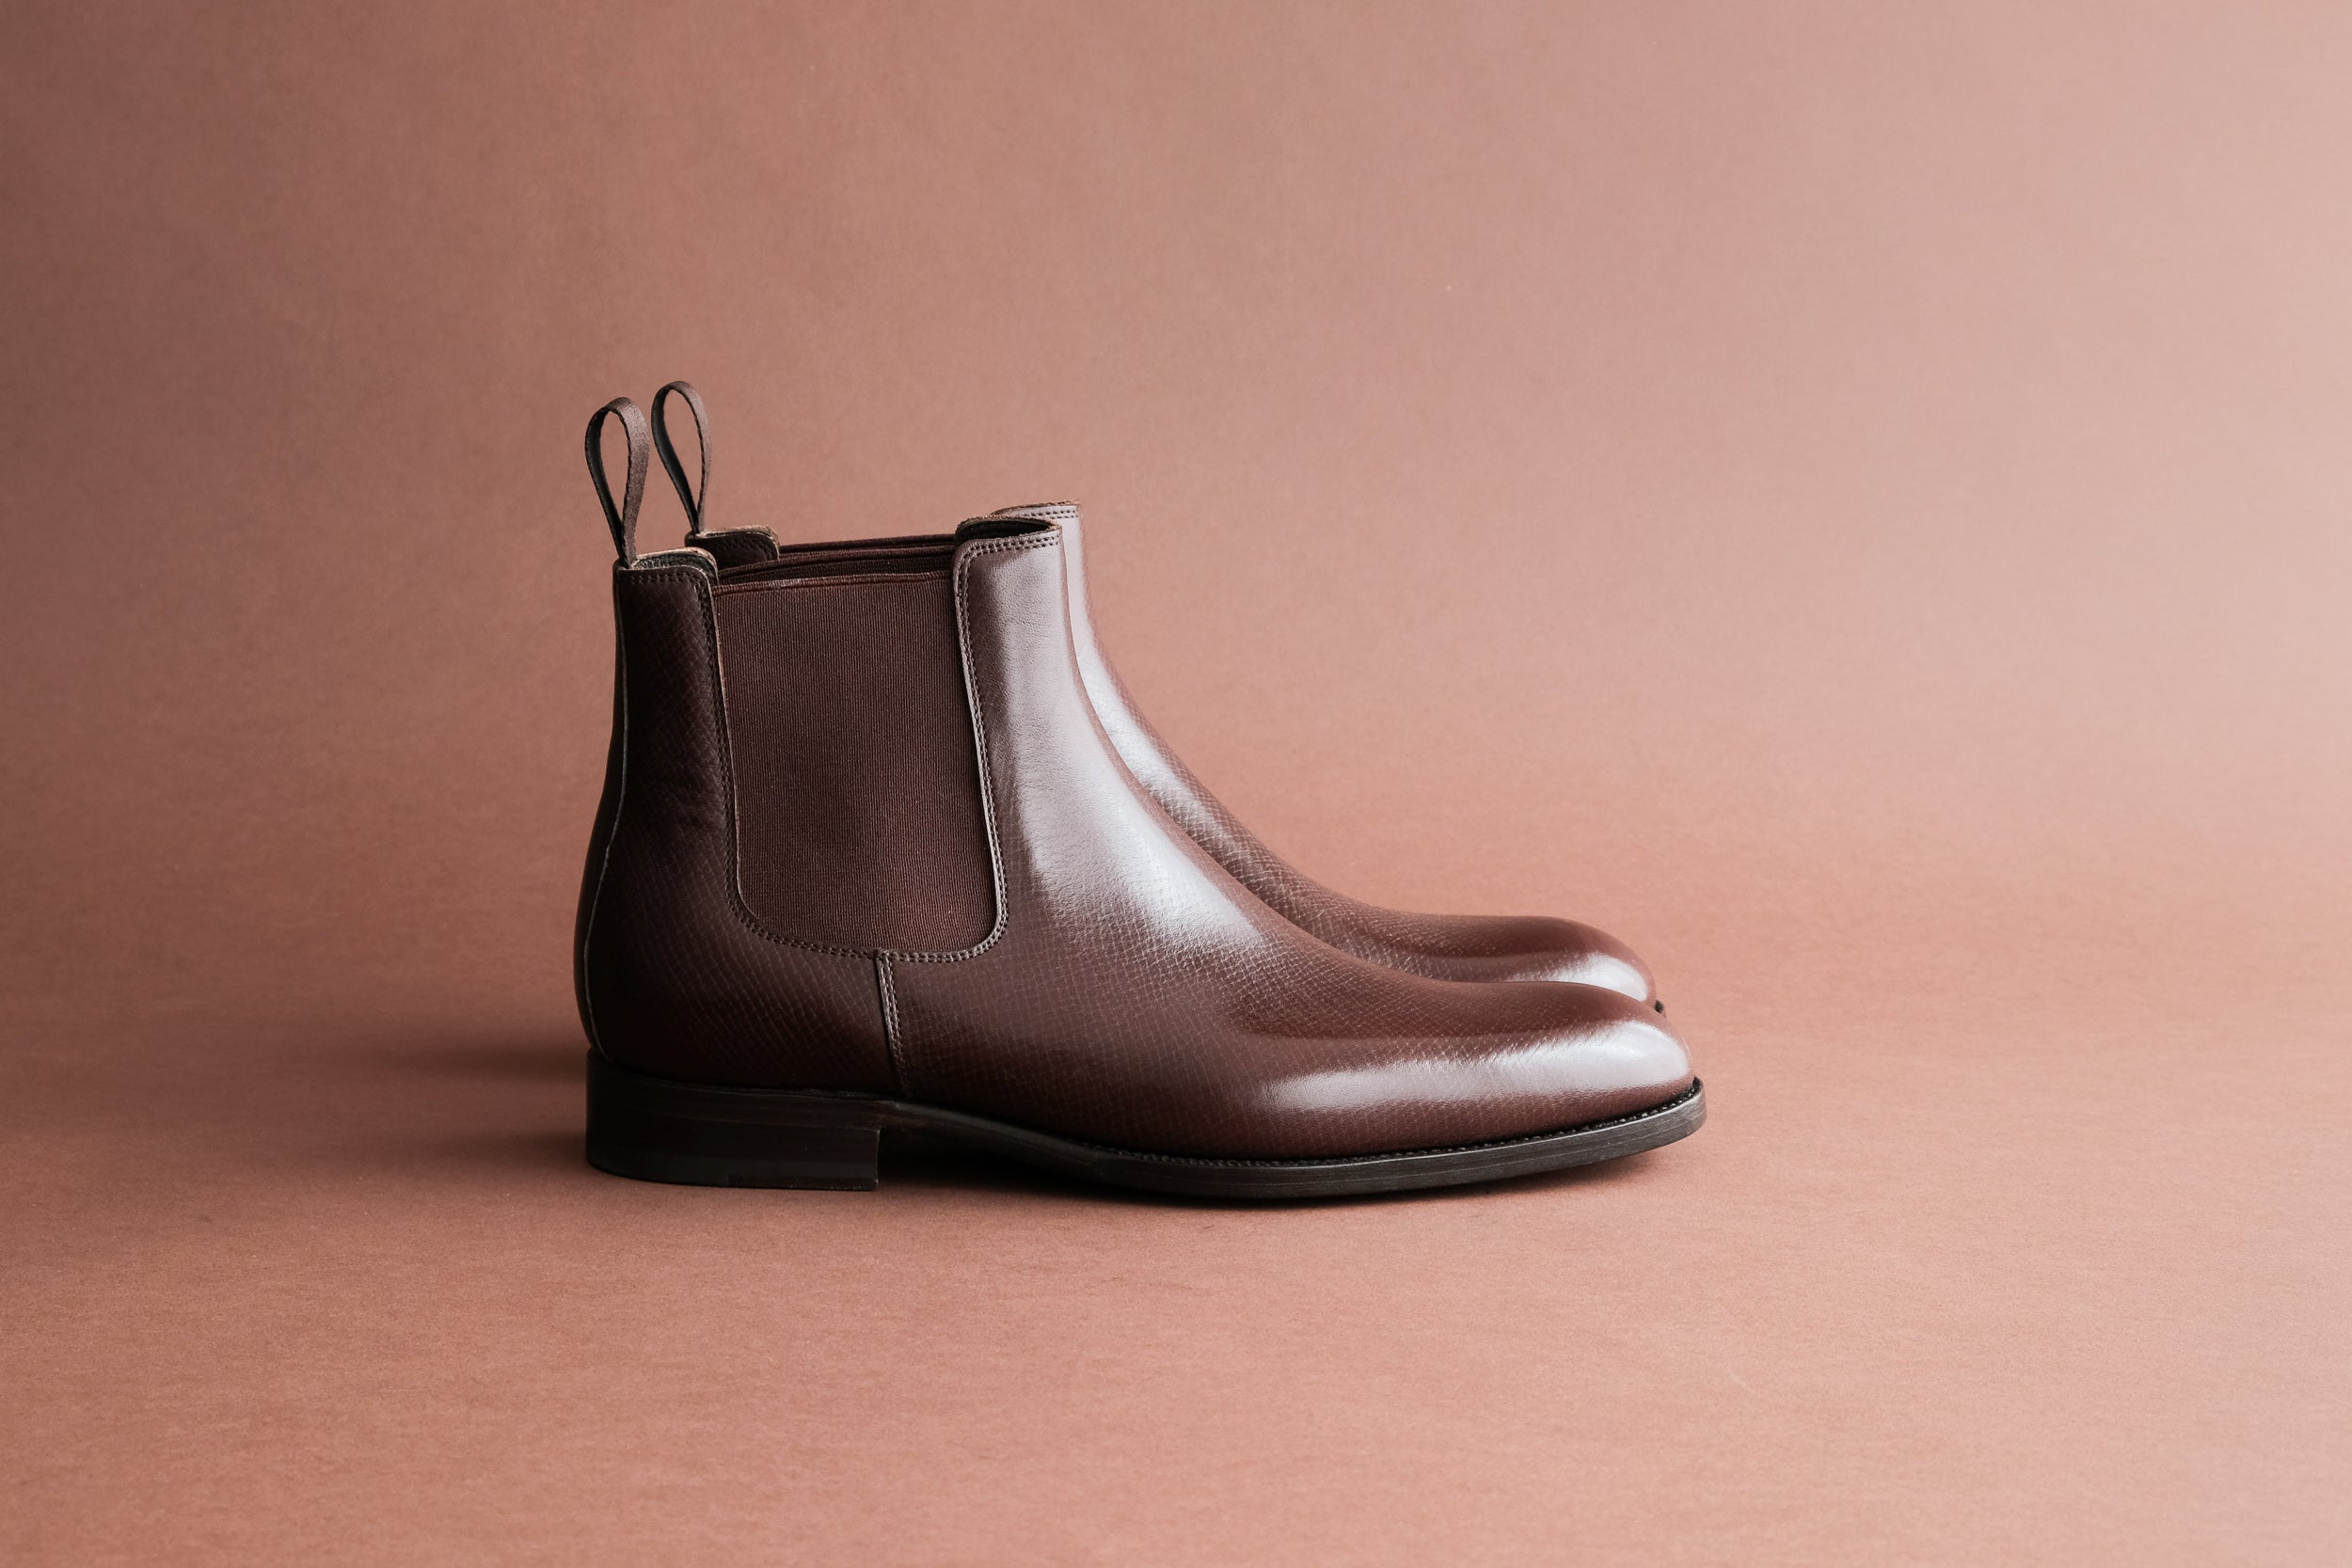 Zonkey Boot hand welted Chelsea Boots from Dark Brown Reindeer